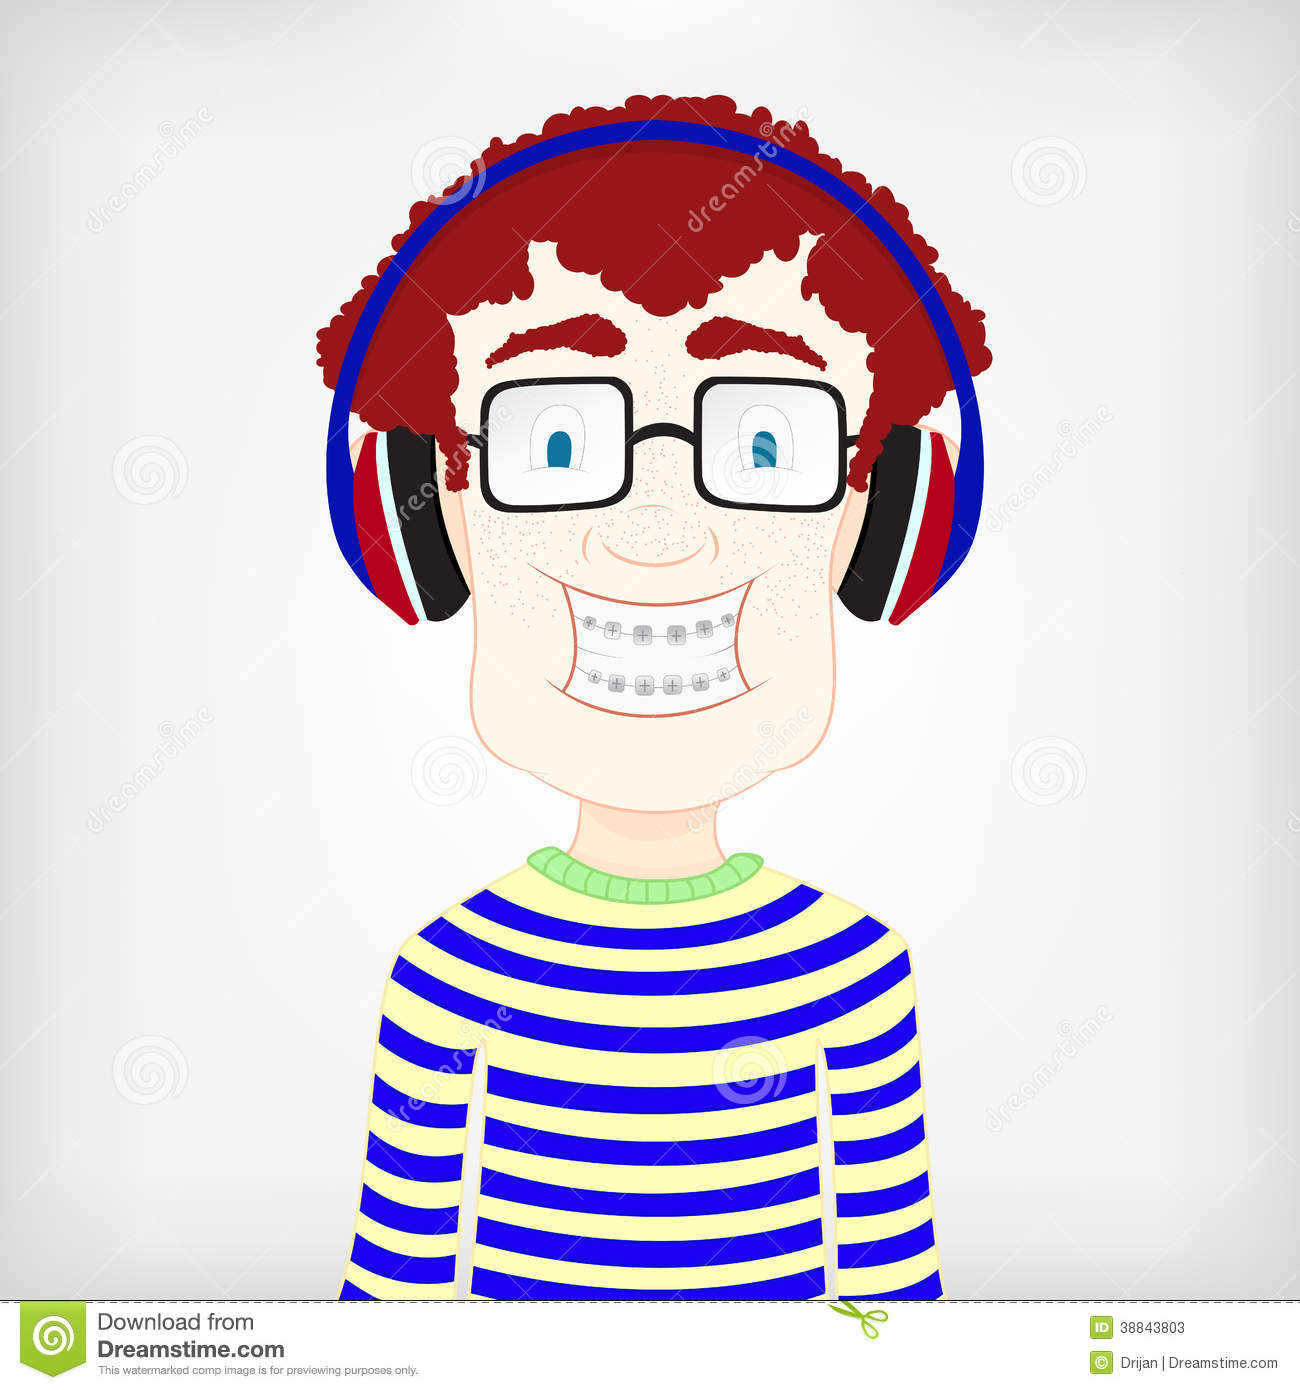 Nerdy Kid With Braces And Sunglasses Listening Music On Headphone